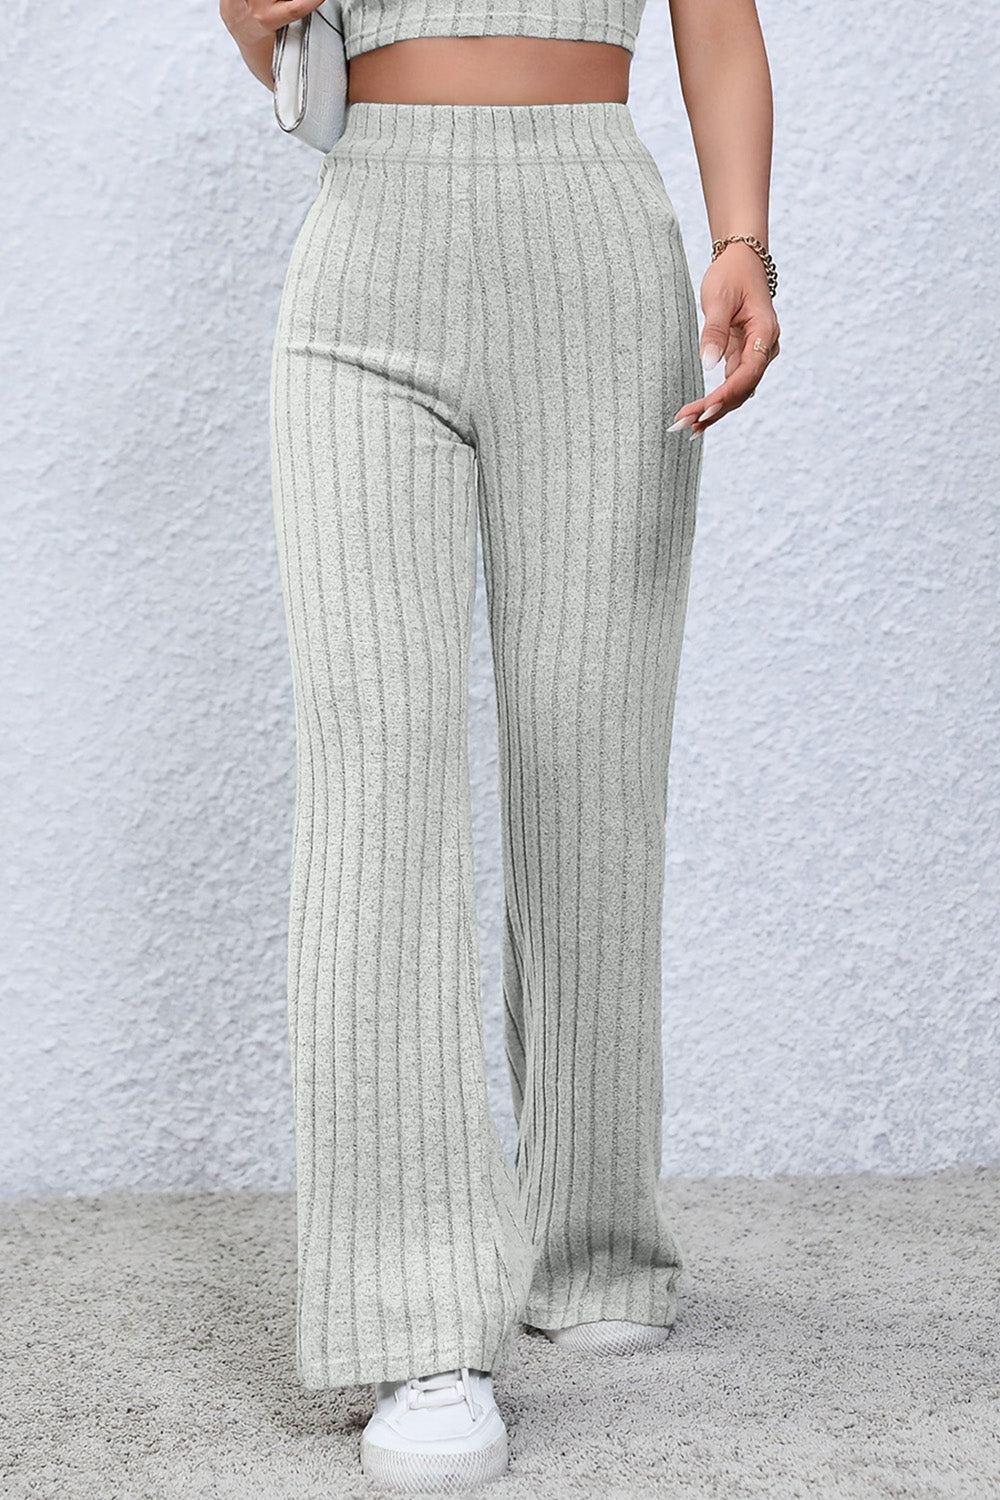 Textured White Color Ribbed High Waist Flare Pants